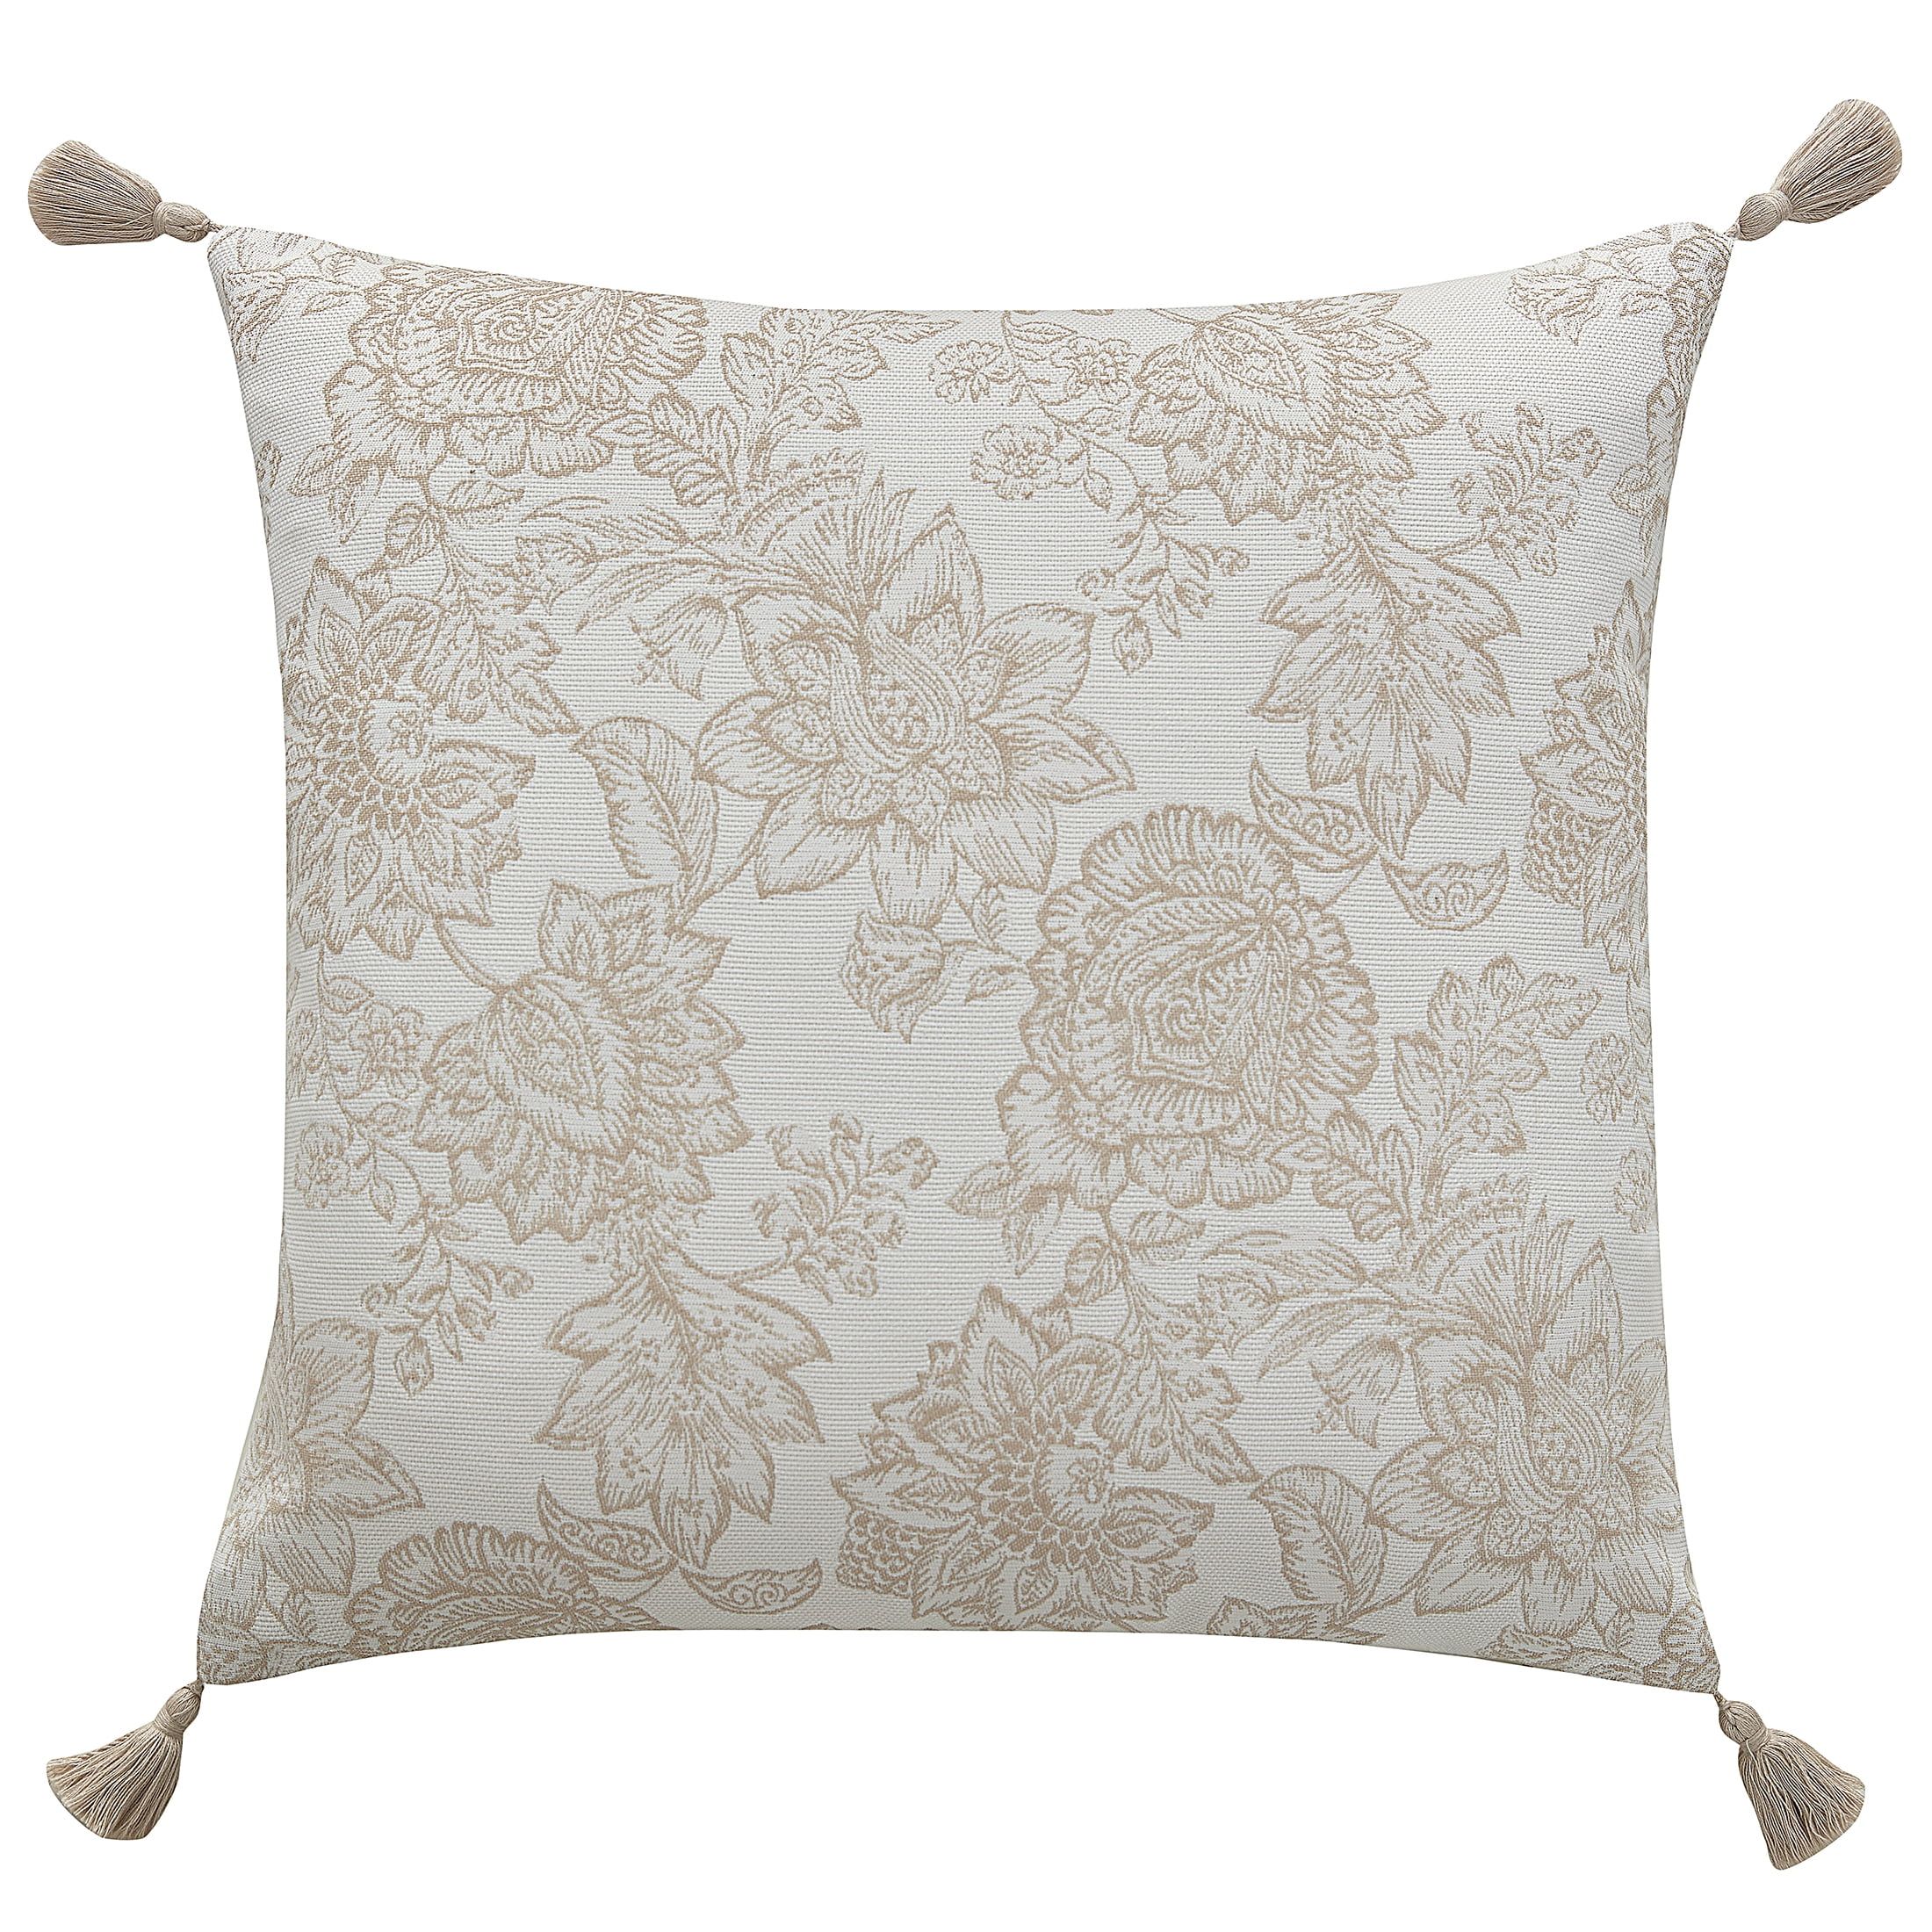 My Texas House Eloise Jacquard Floral Reversible Decorative Pillow Cover, 18" x 18", Taupe | Walmart (US)